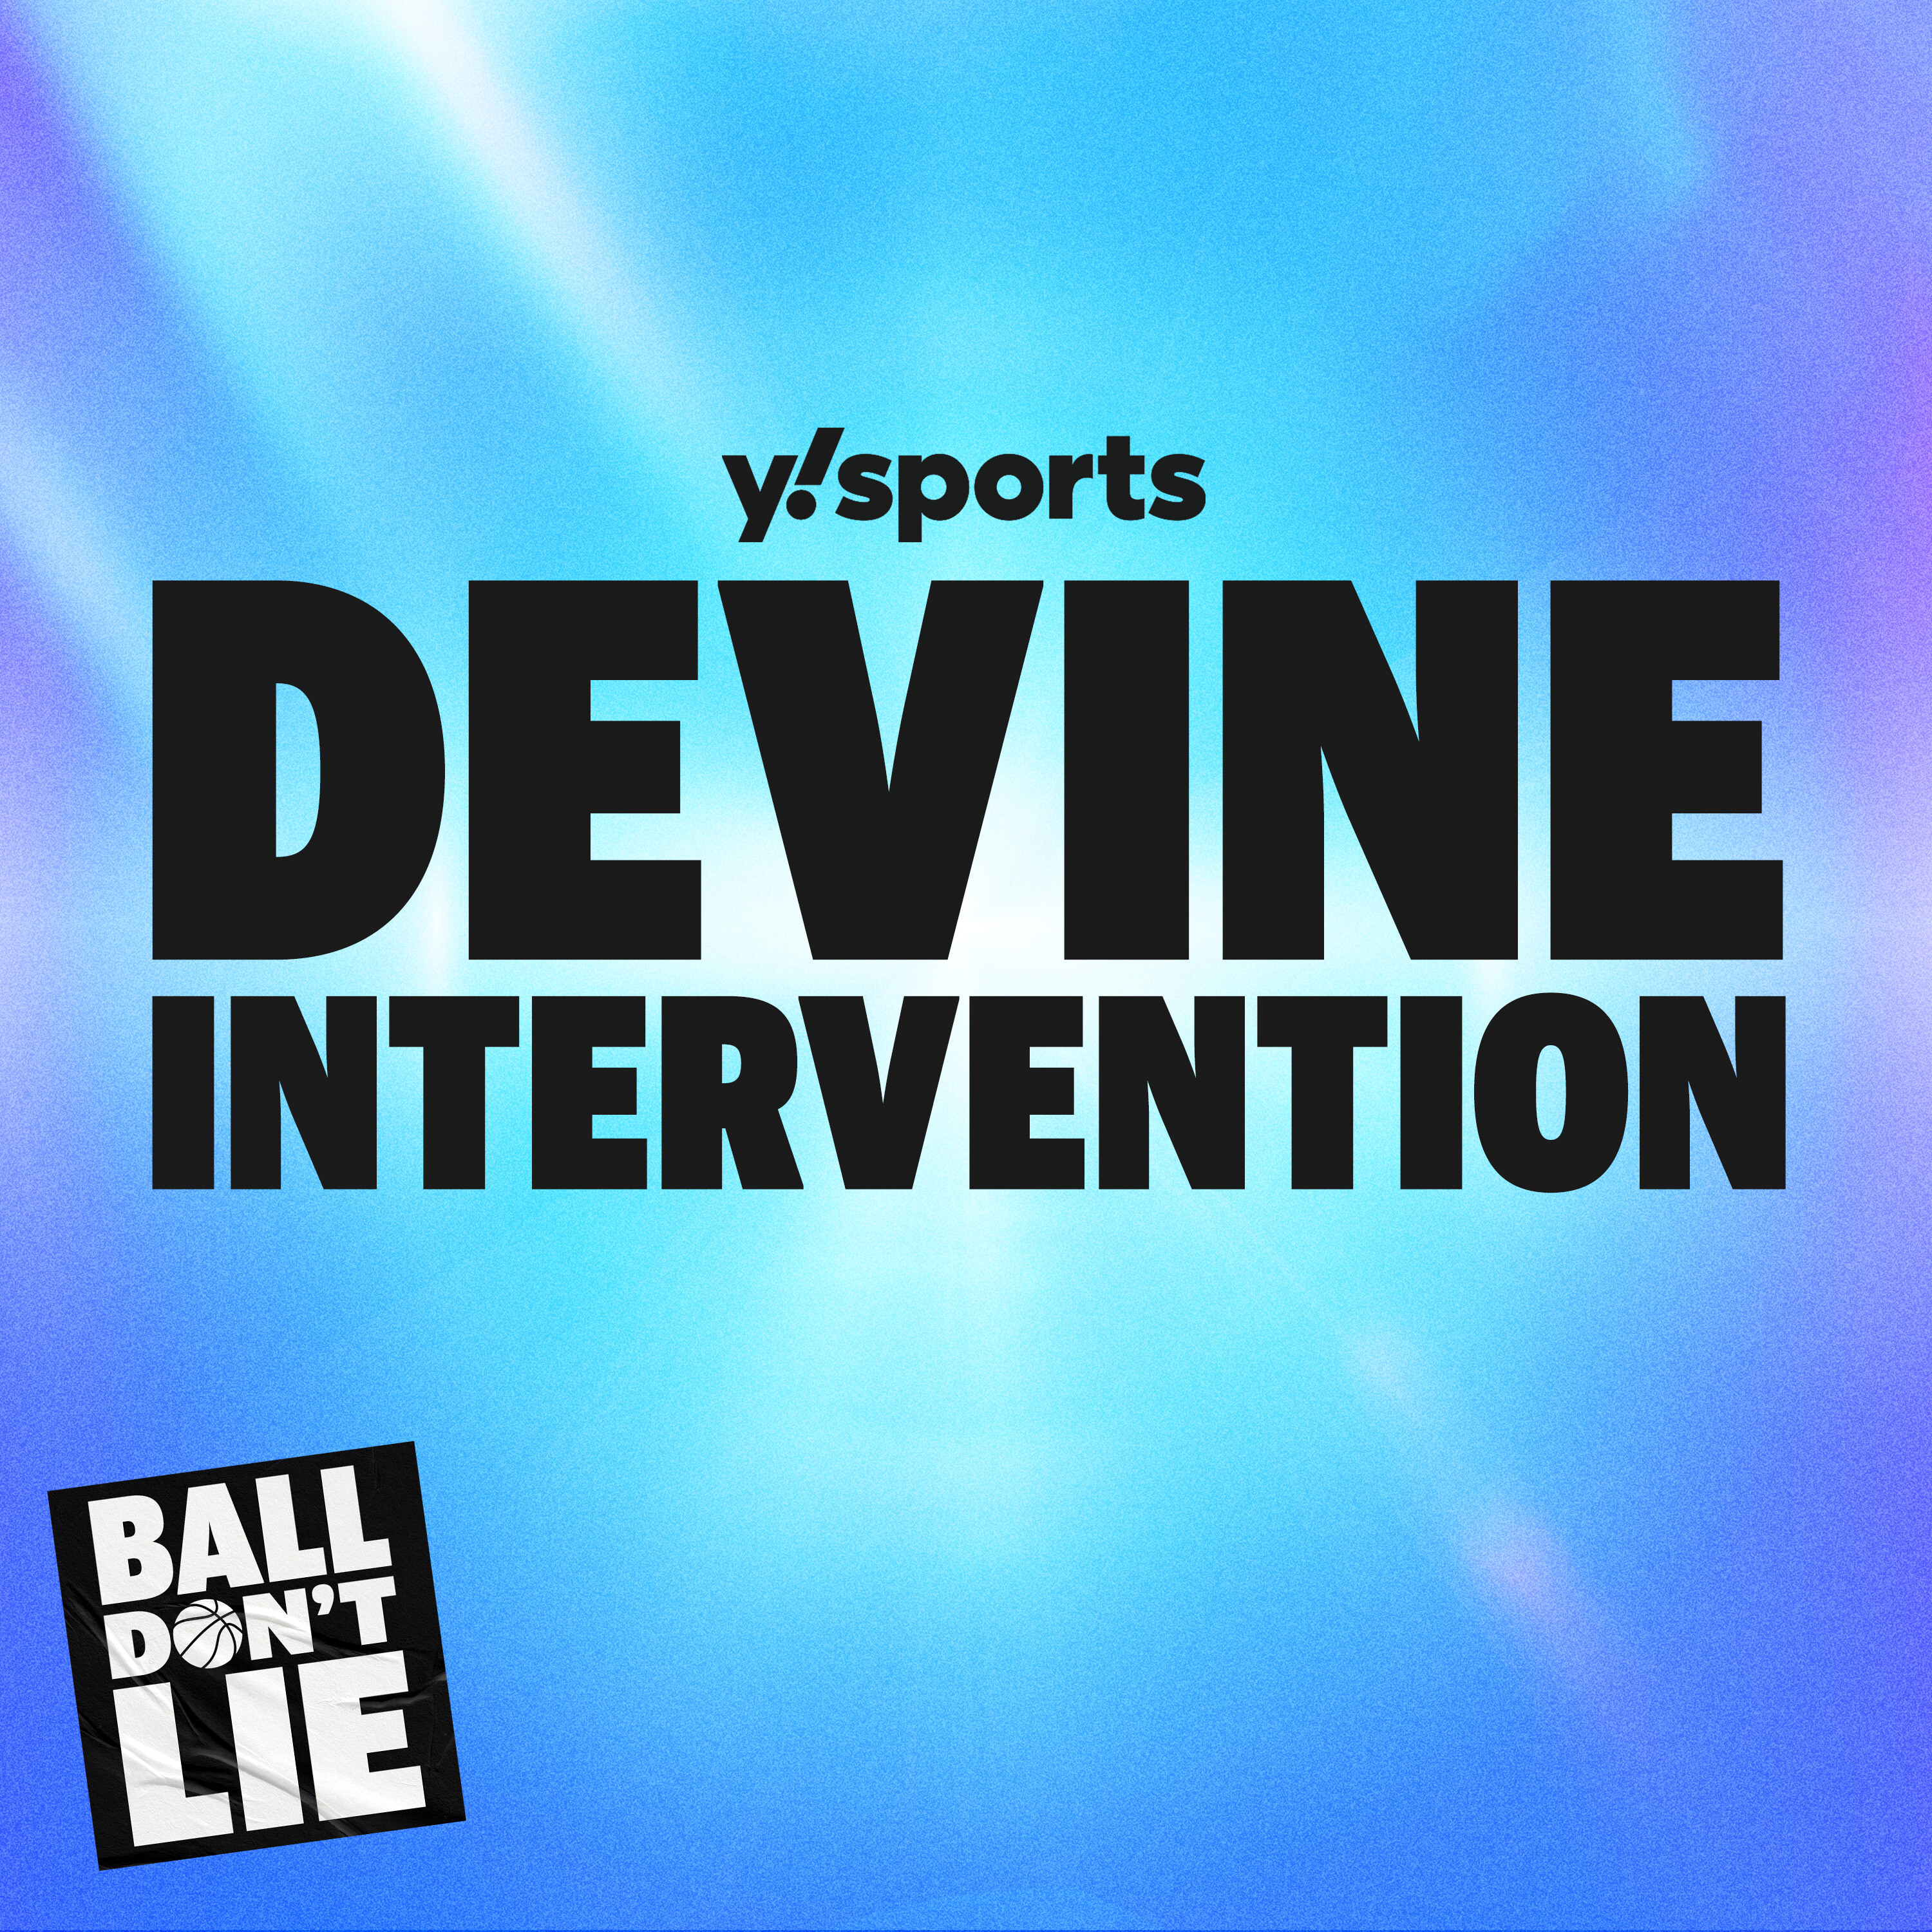 Knicks & Nuggets take 2-0 leads while 76ers & Lakers complain about officiating | Devine Intervention